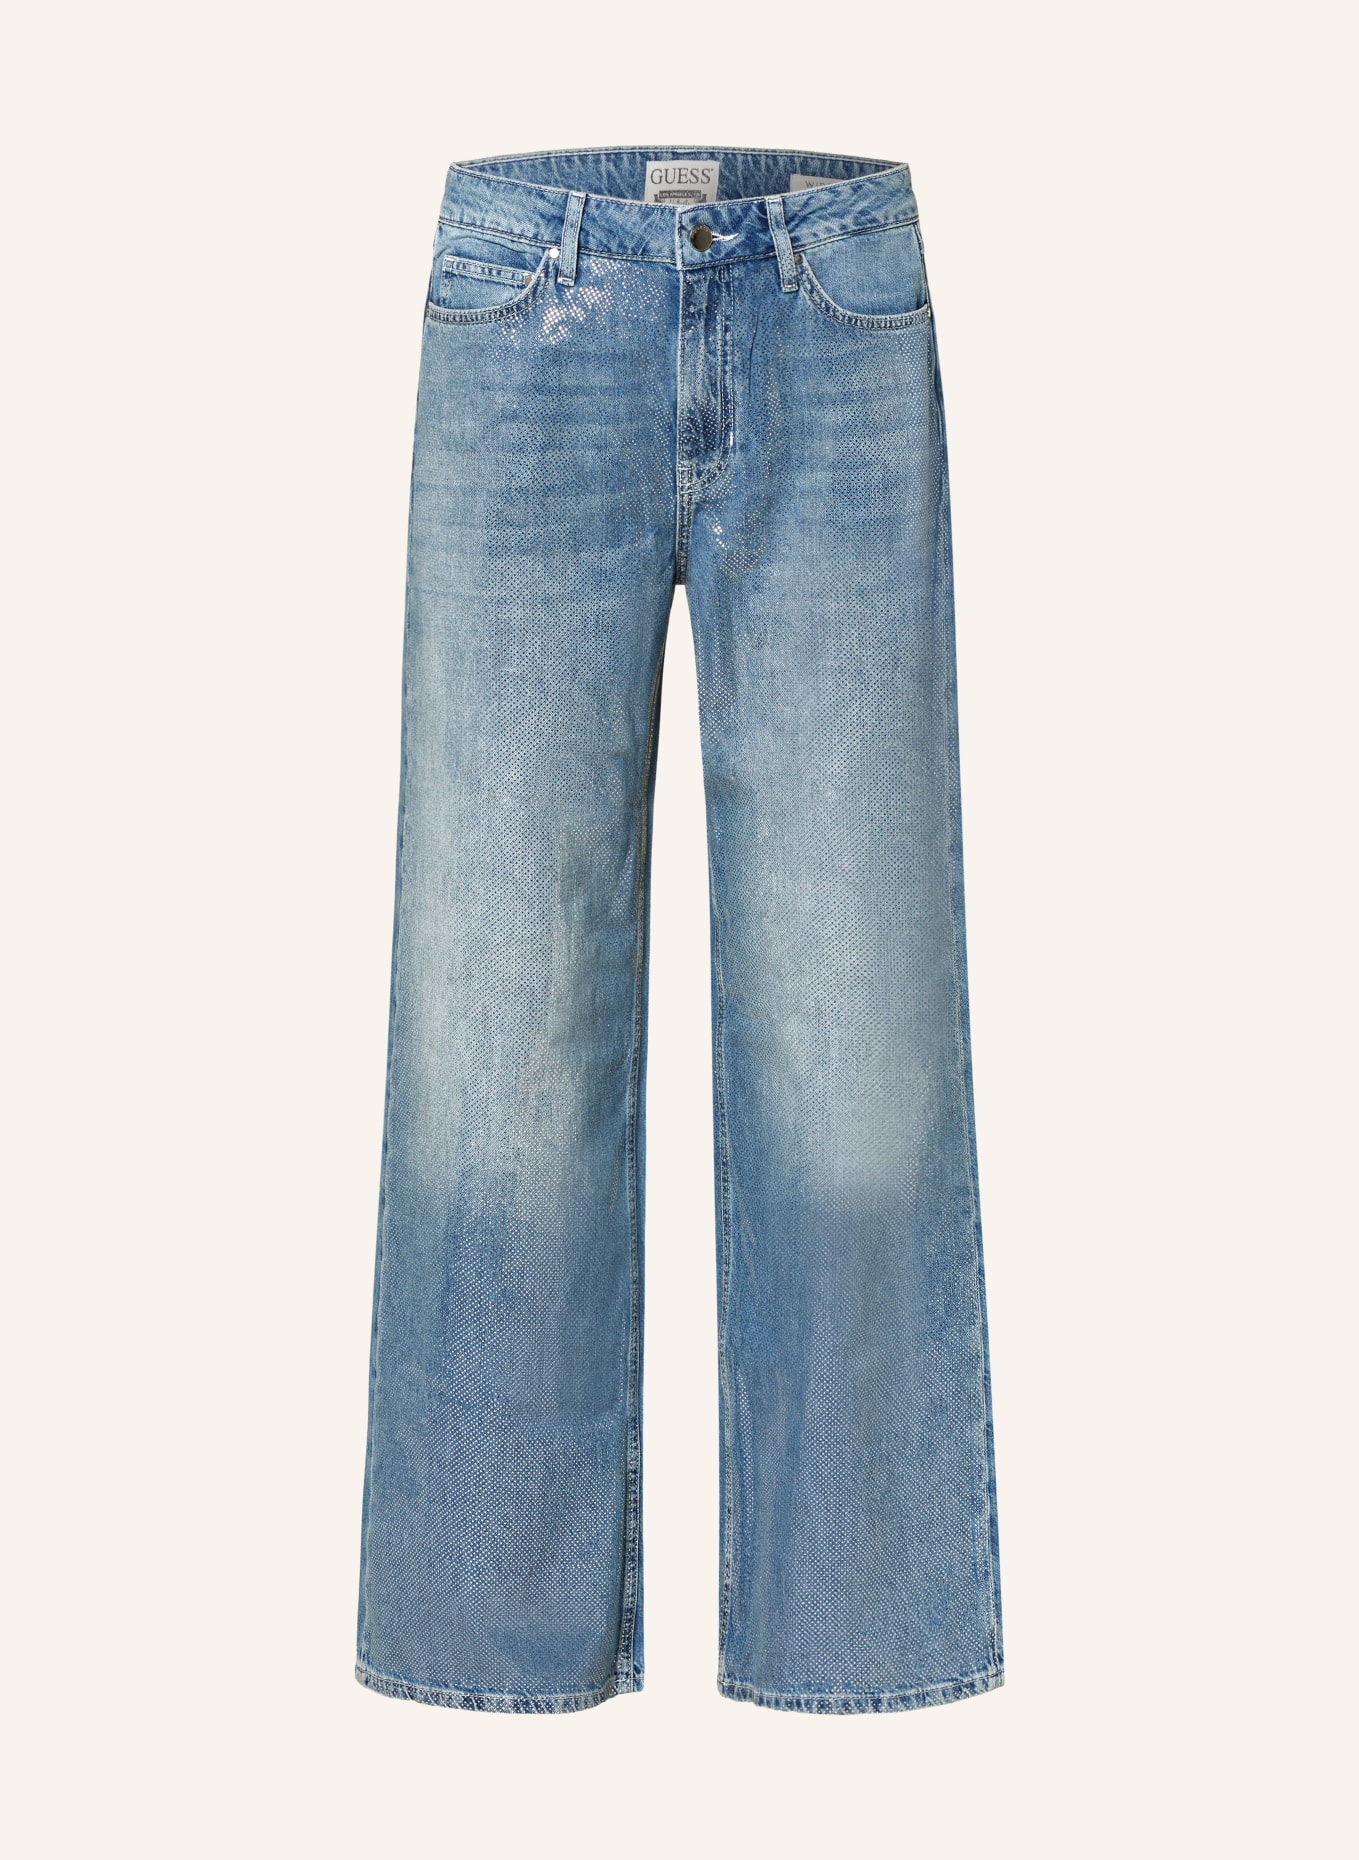 GUESS Straight jeans BELLFLOWER with decorative gems, Color: RIC0 COCORICO (Image 1)